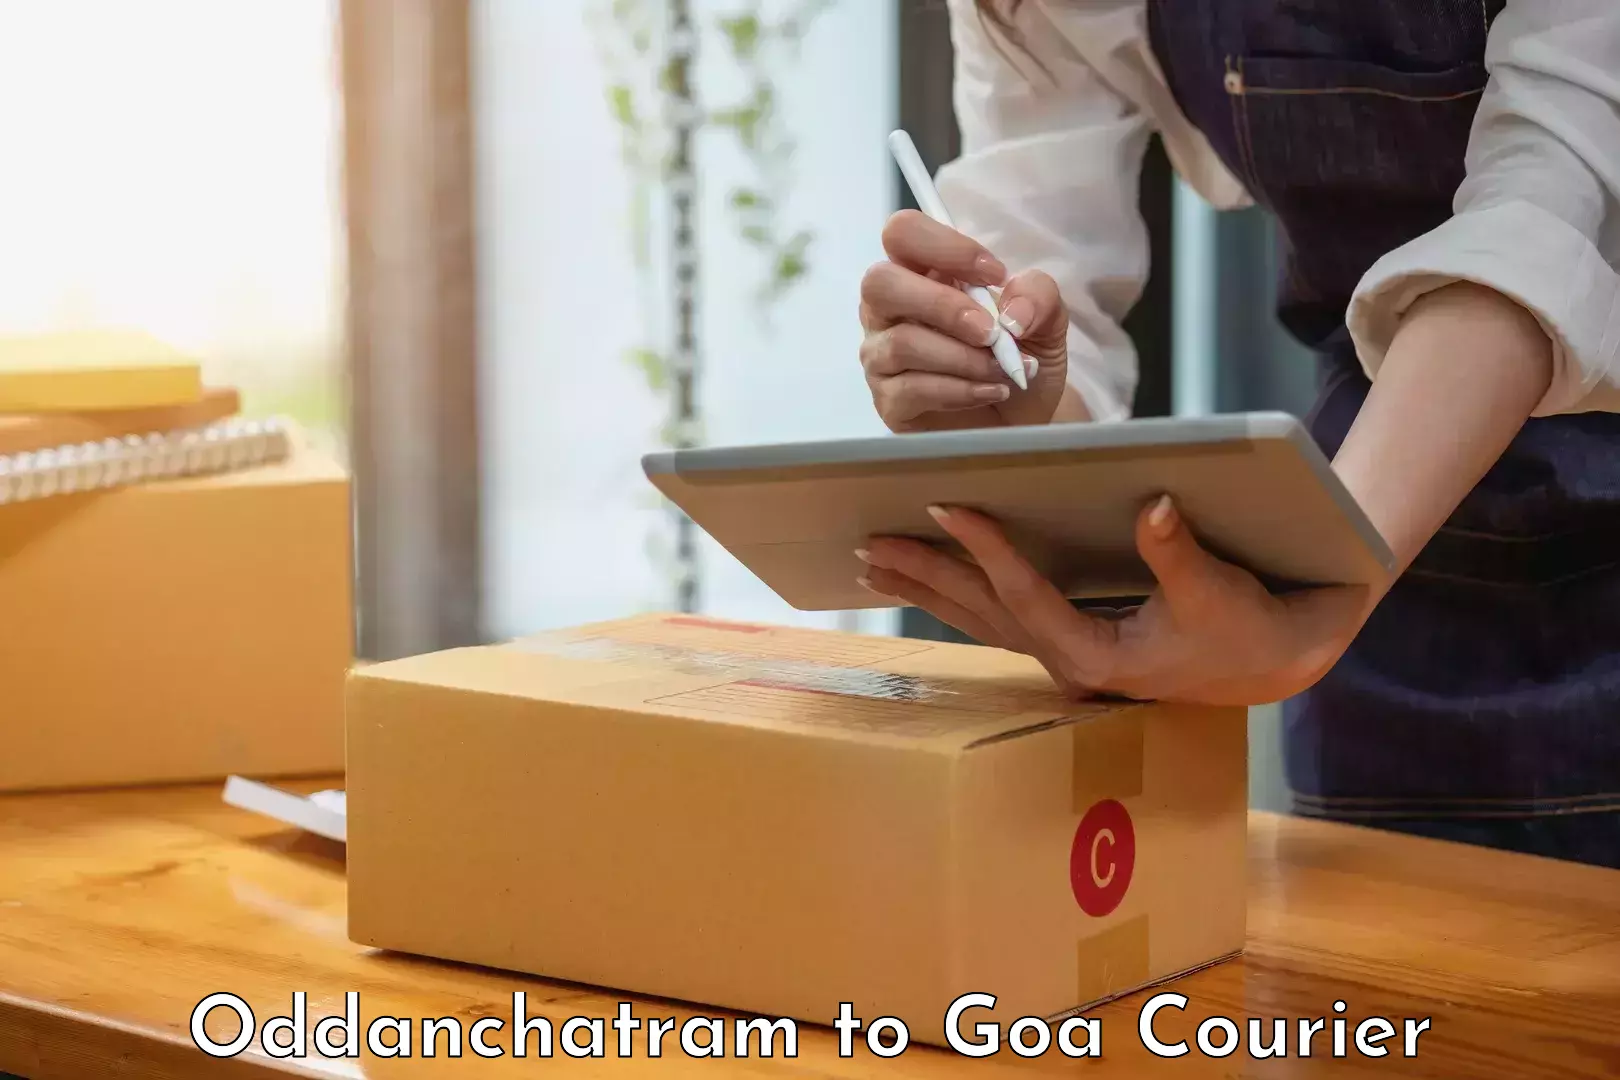 Same-day delivery solutions Oddanchatram to South Goa